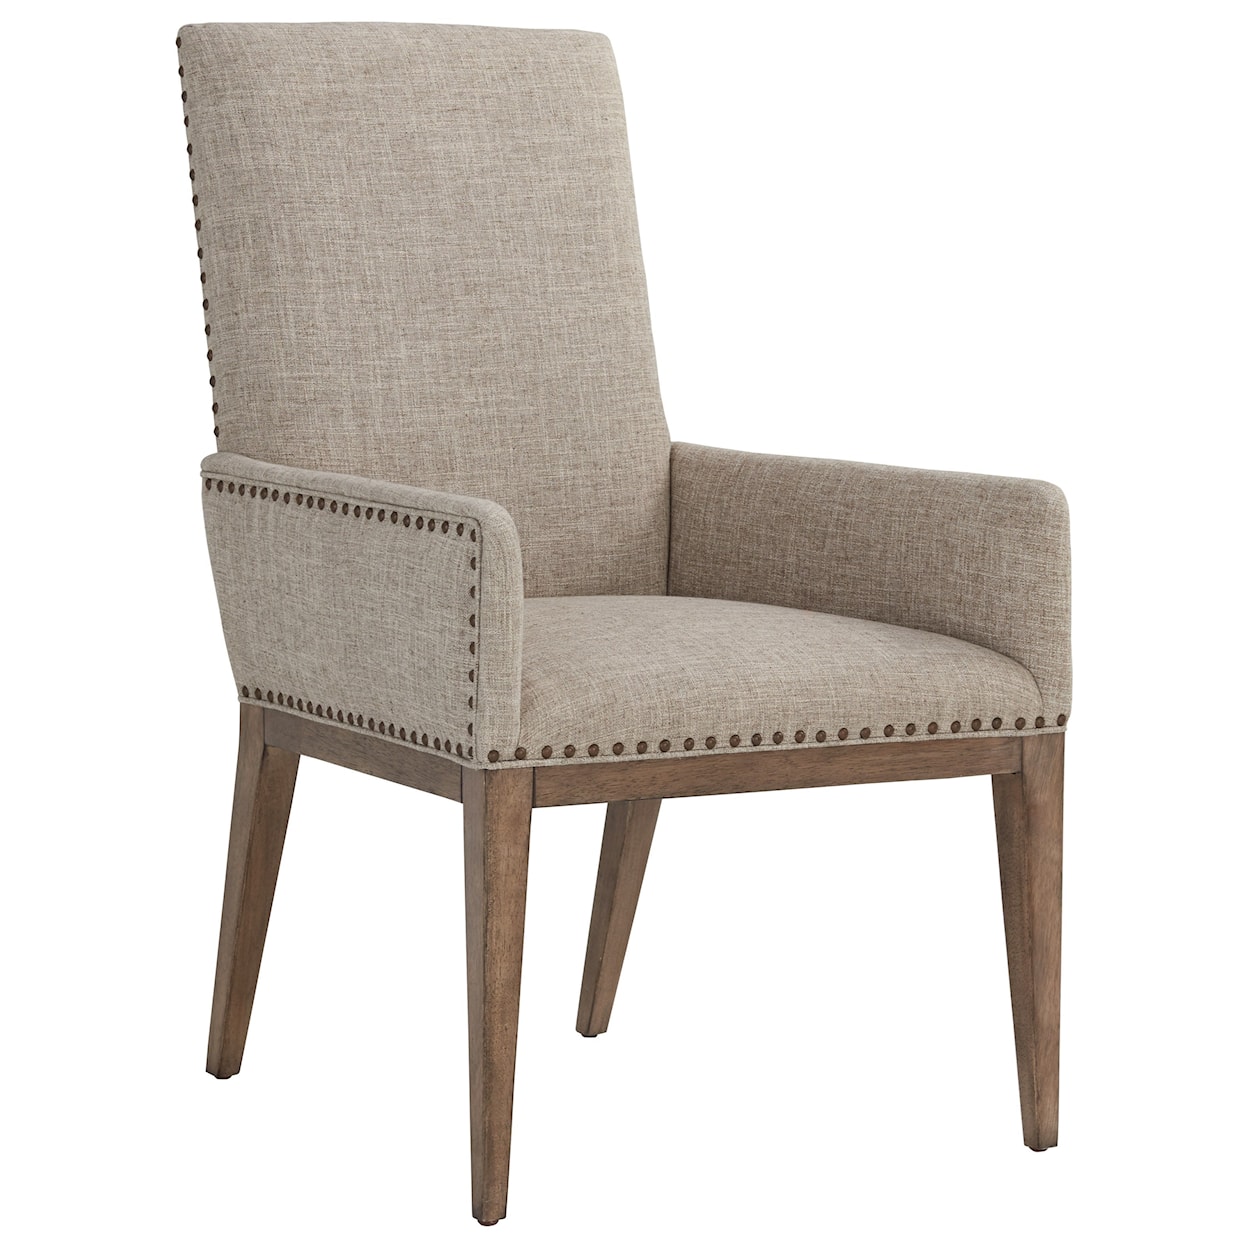 Tommy Bahama Home Cypress Point Devereaux Upholstered Arm Chair